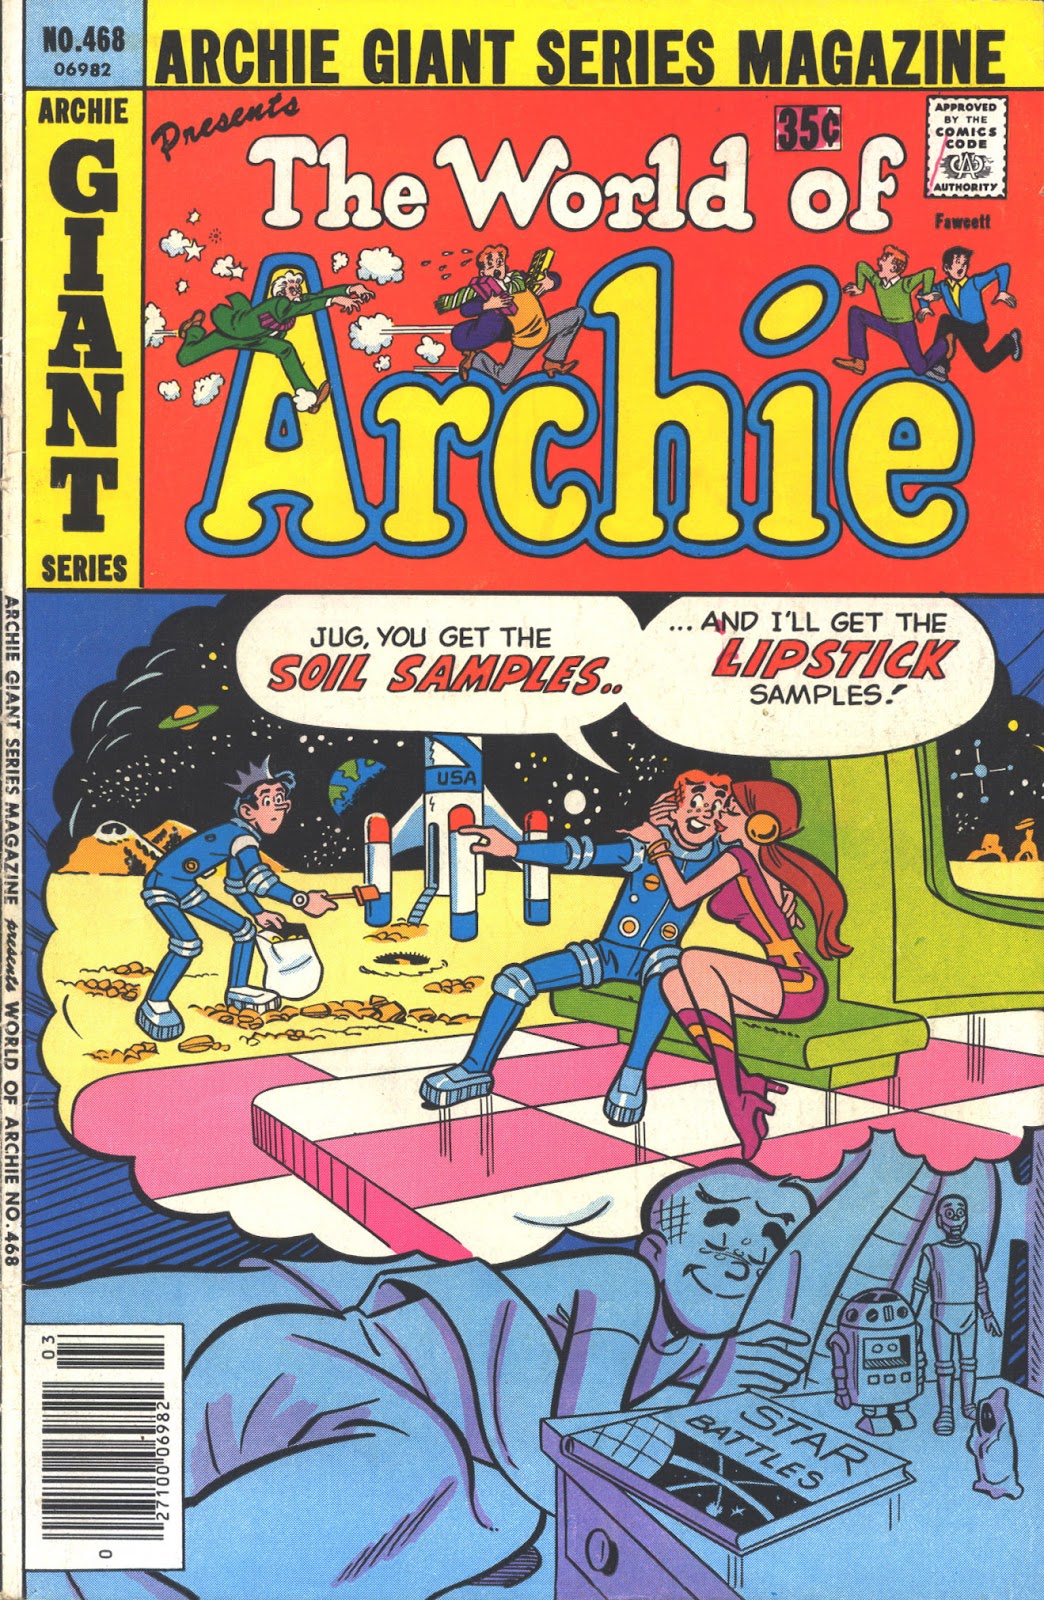 Archie Giant Series Magazine issue 468 - Page 1